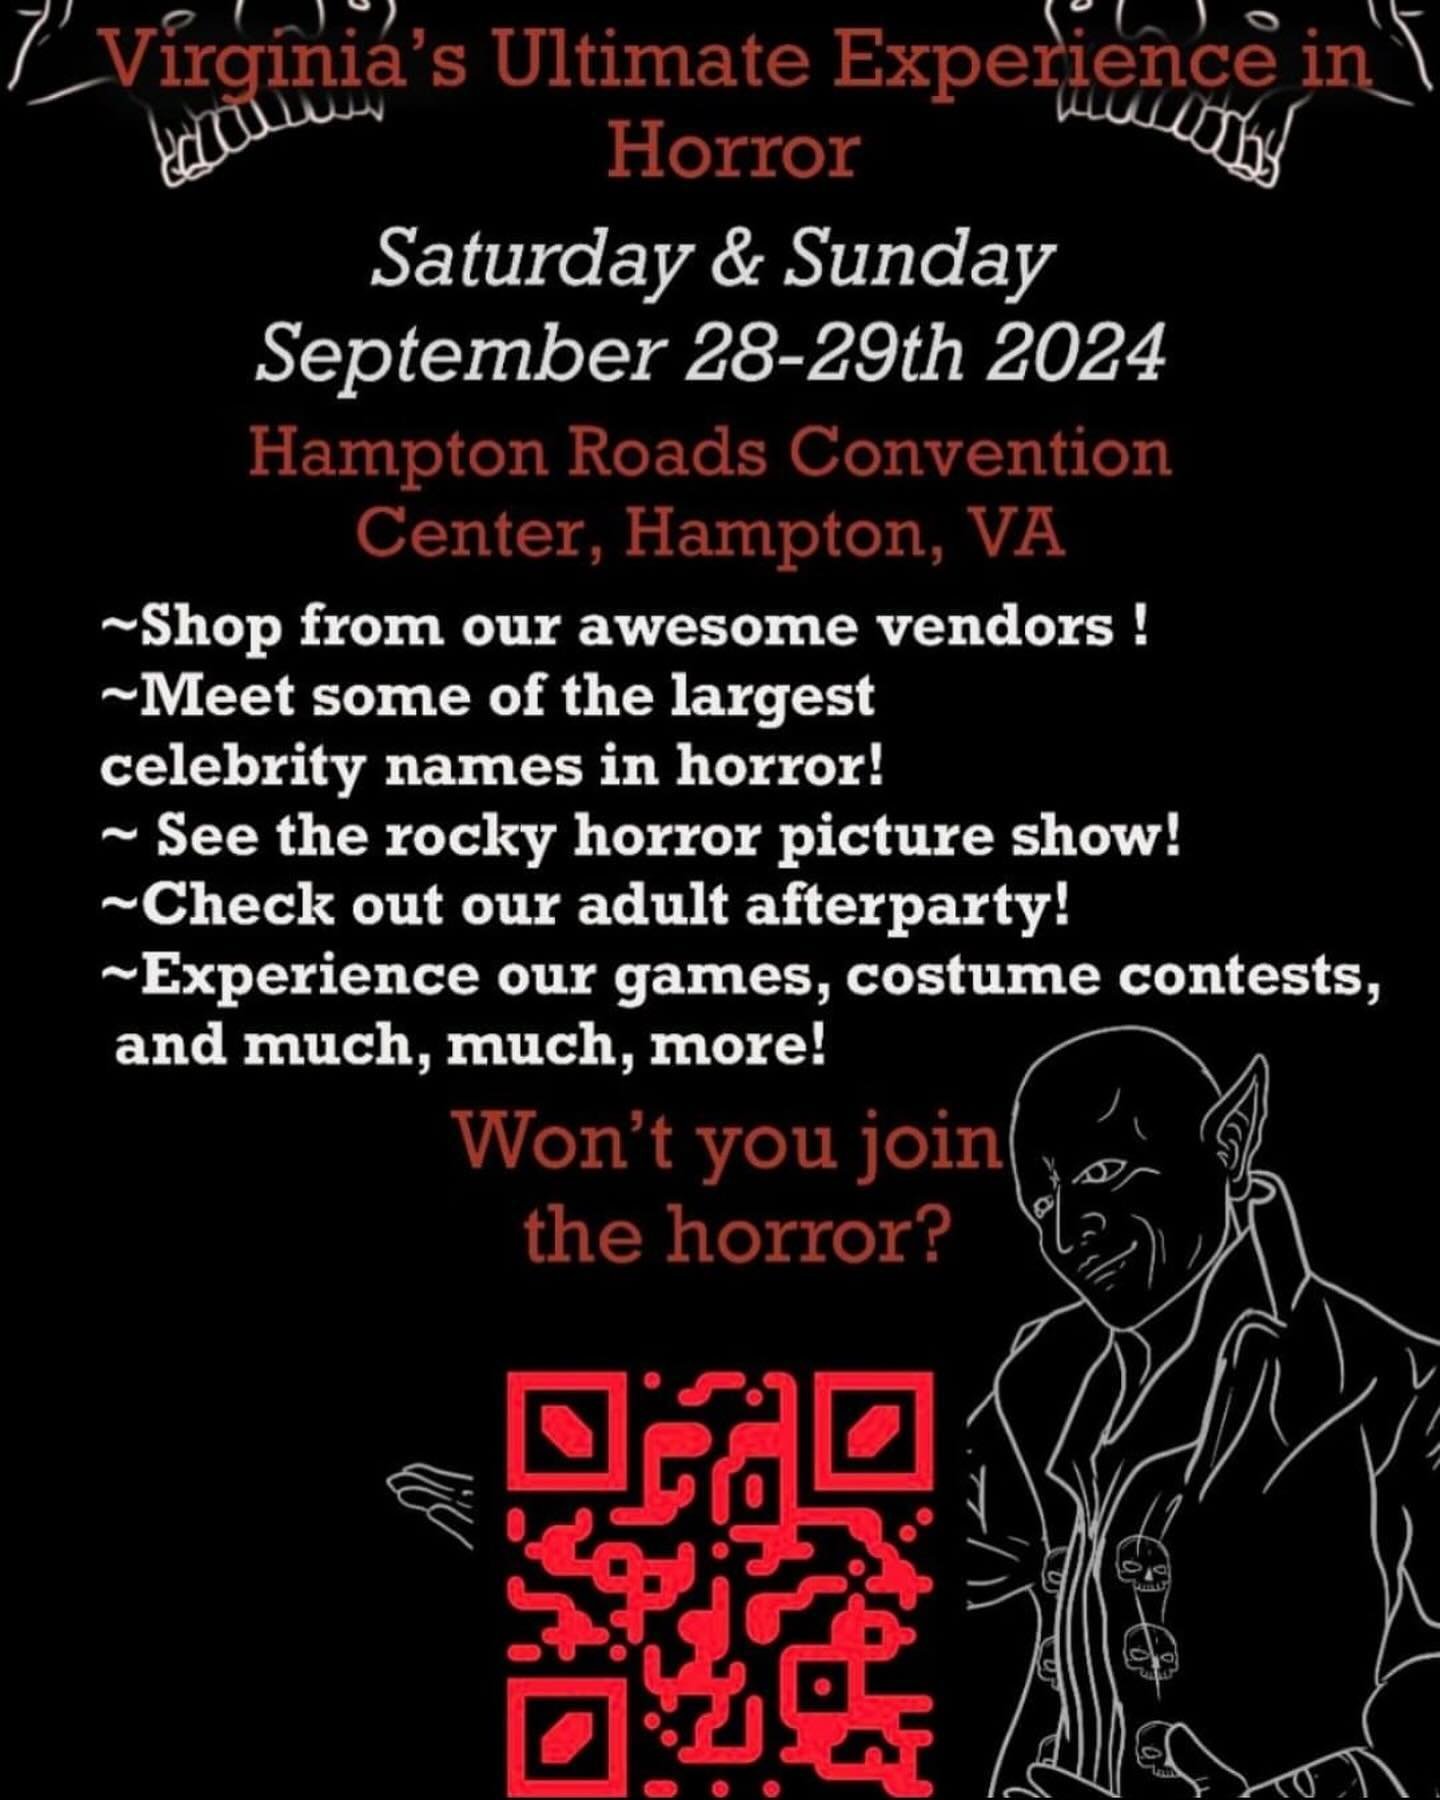 Returning to Haunted Screams this year! Catch me there with my candy bowl and some NEWNESS that I have in the works 🎃 

#horrorconvention #smallbusiness #757 #lanenabynena #handmade #spookyseason #spookyshop